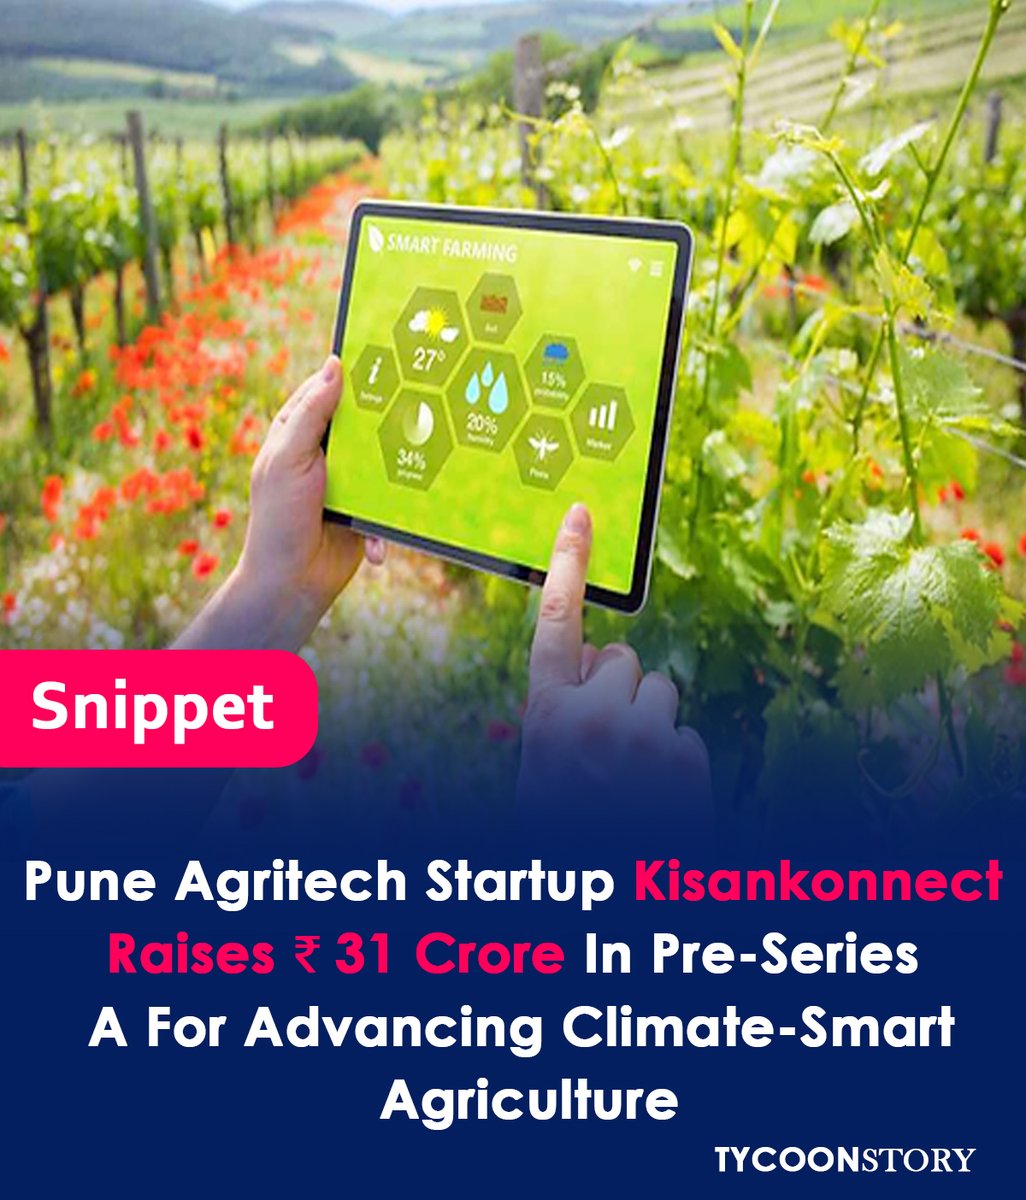 Kisankonnect, An Agritech Startup, Raises Rs. 31 Cr. In Pre-series A Funding

#Kisankonnect #AgritechStartup #Funding #PreSeriesA #AgriInnovation #StartupFunding #Investment #FarmTech #Agriculture #Technology  #AgriInvestment #AgritechGrowth 

tycoonstory.com